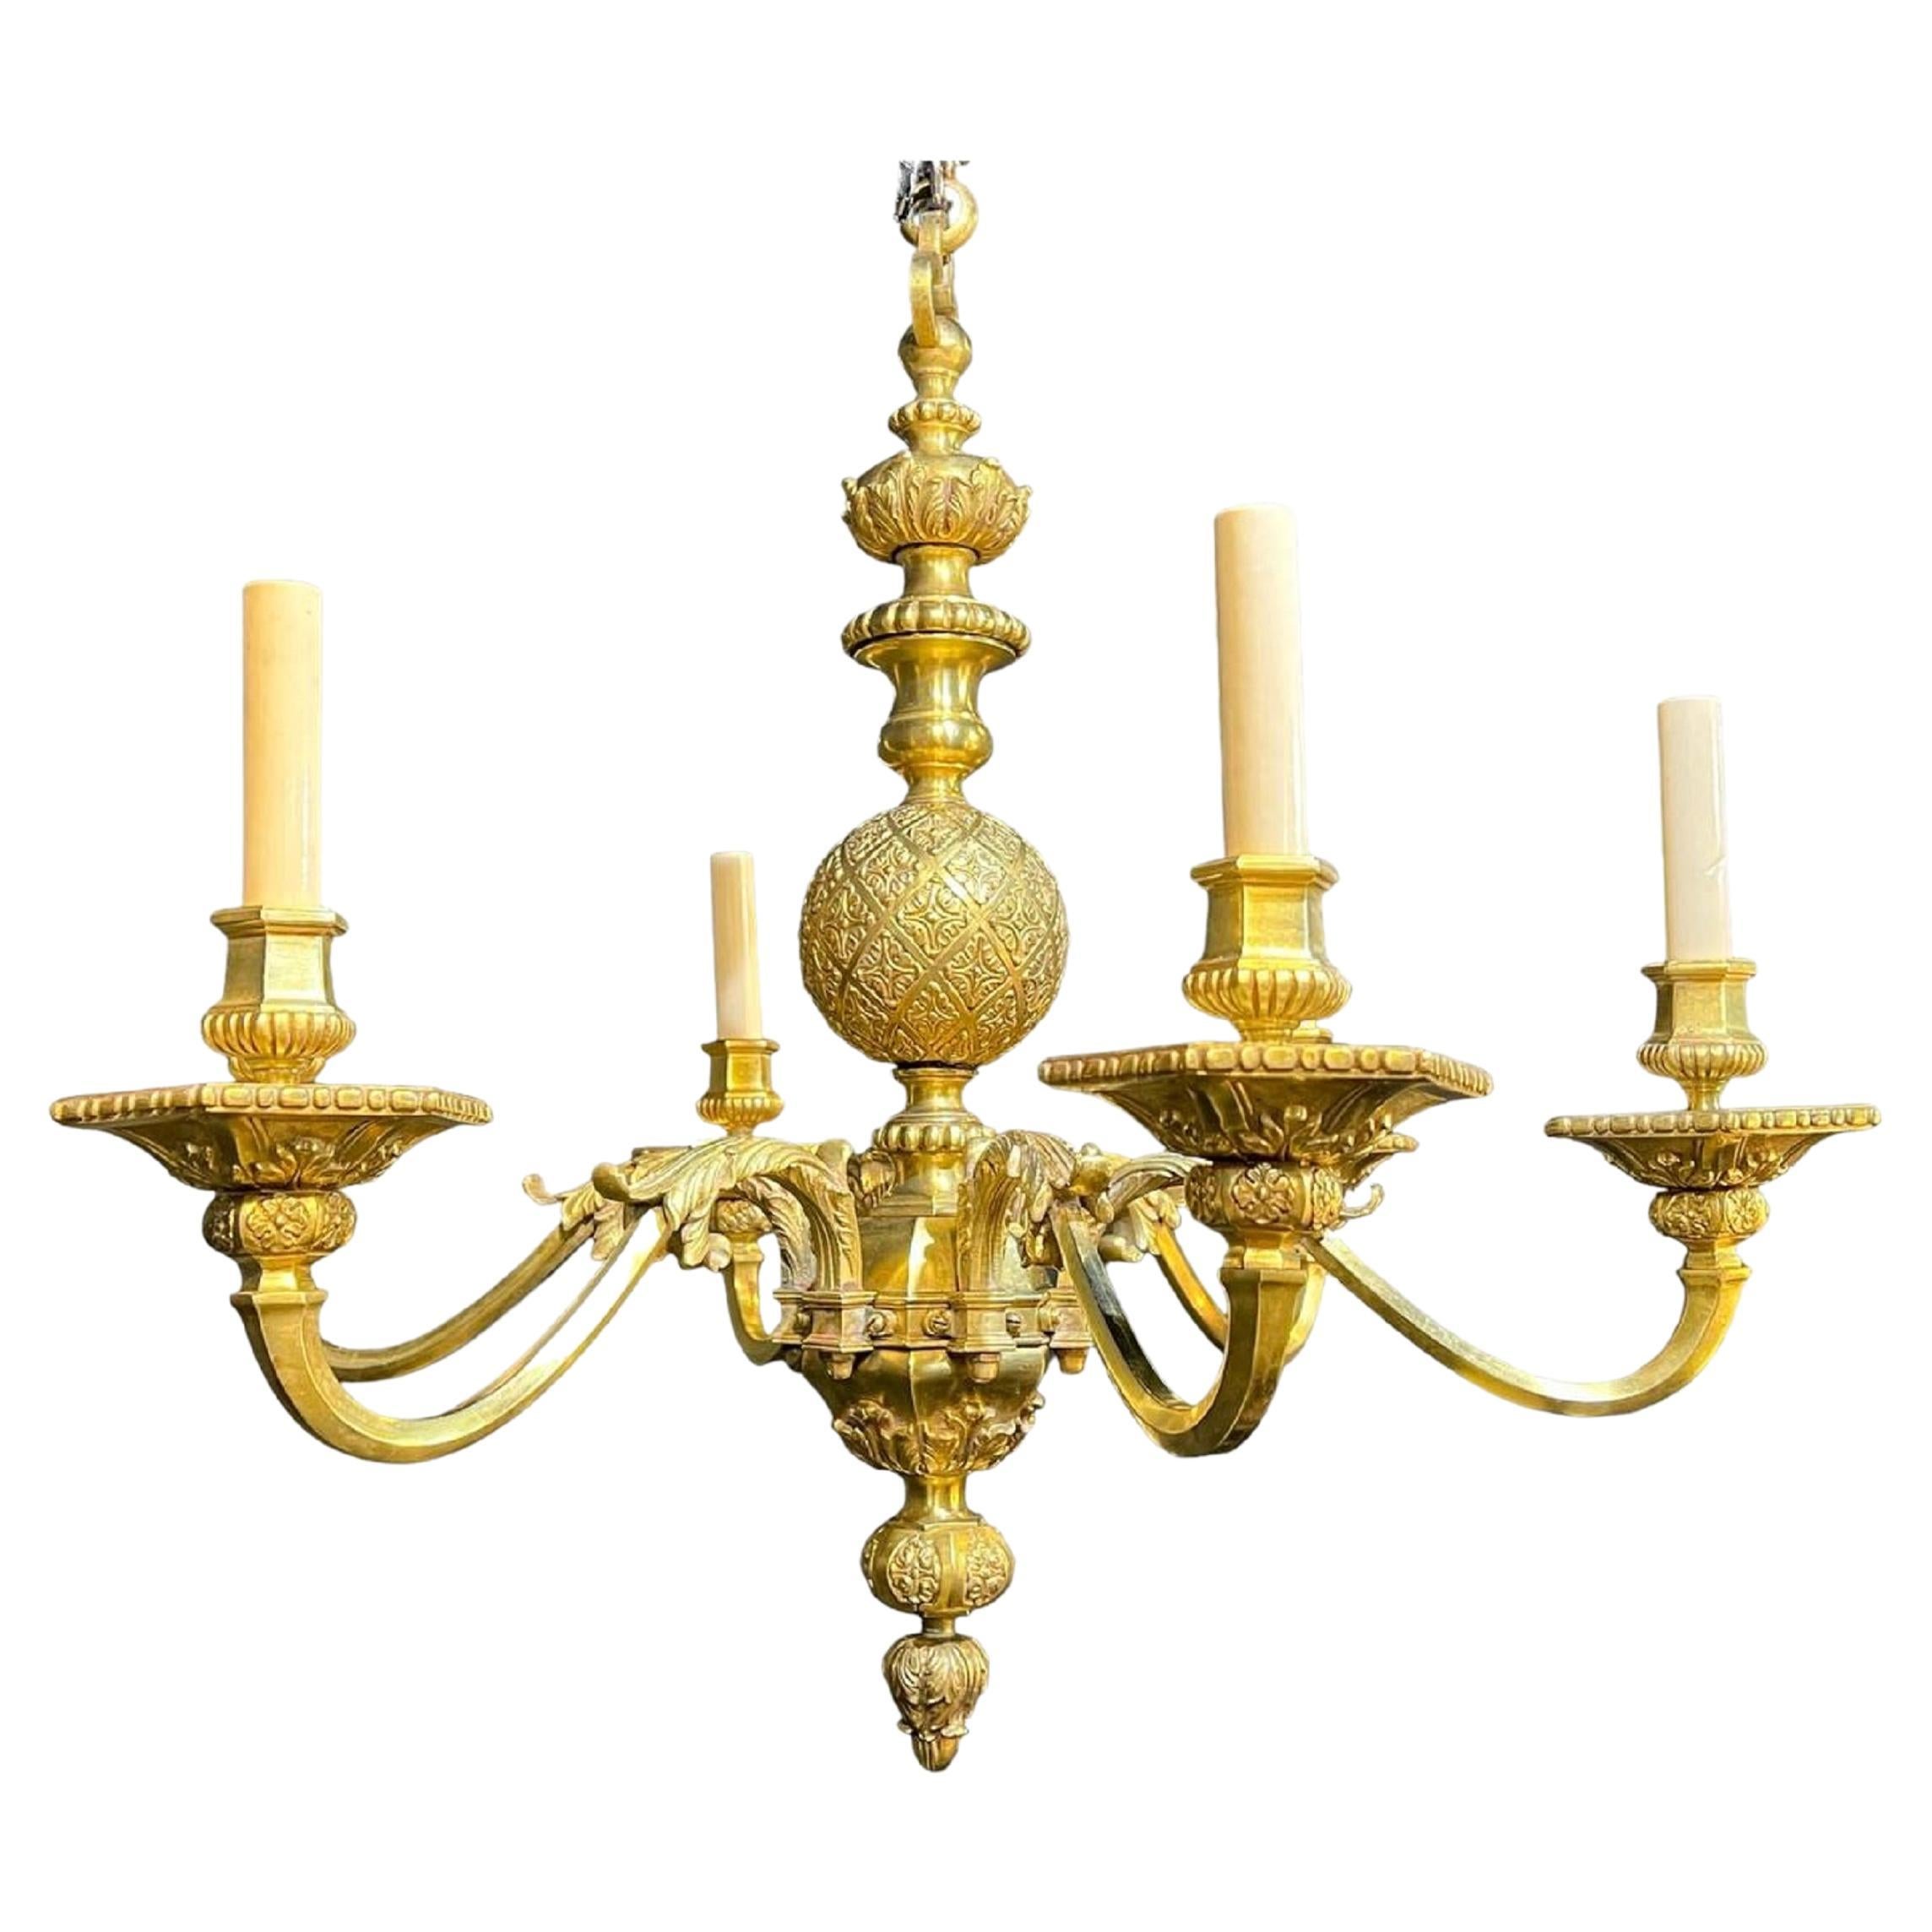 1900's Caldwell Bronze Engraved Chandelier with 6 lights